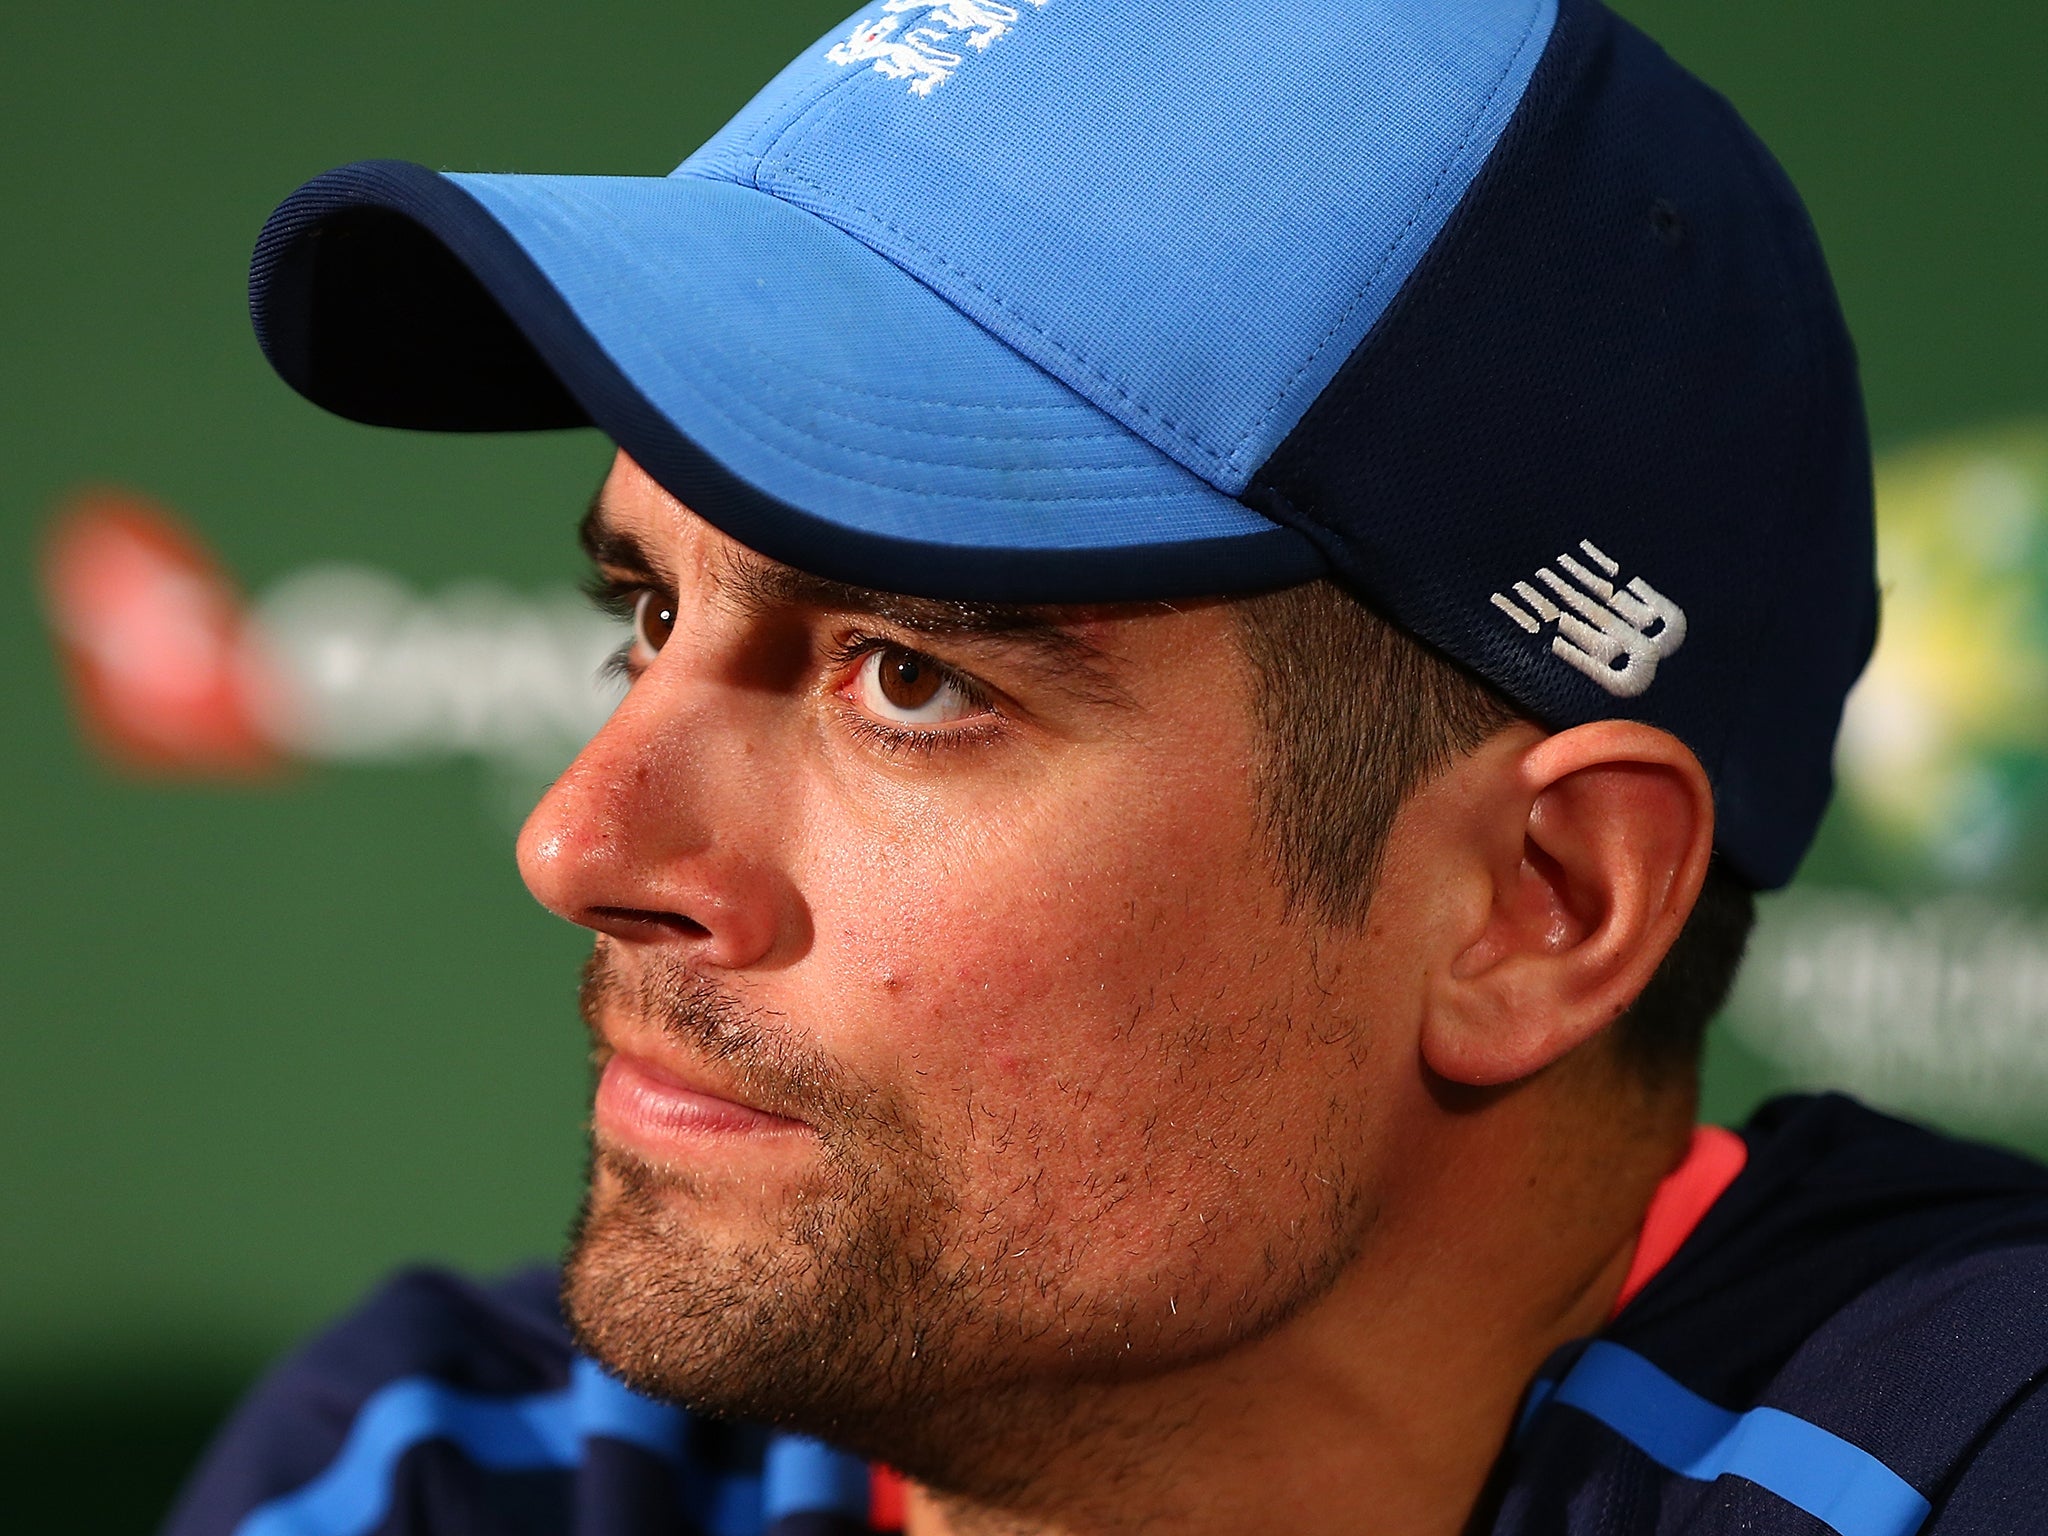 Alastair Cook issued a passionate defence of his desire to play for England after receiving criticism